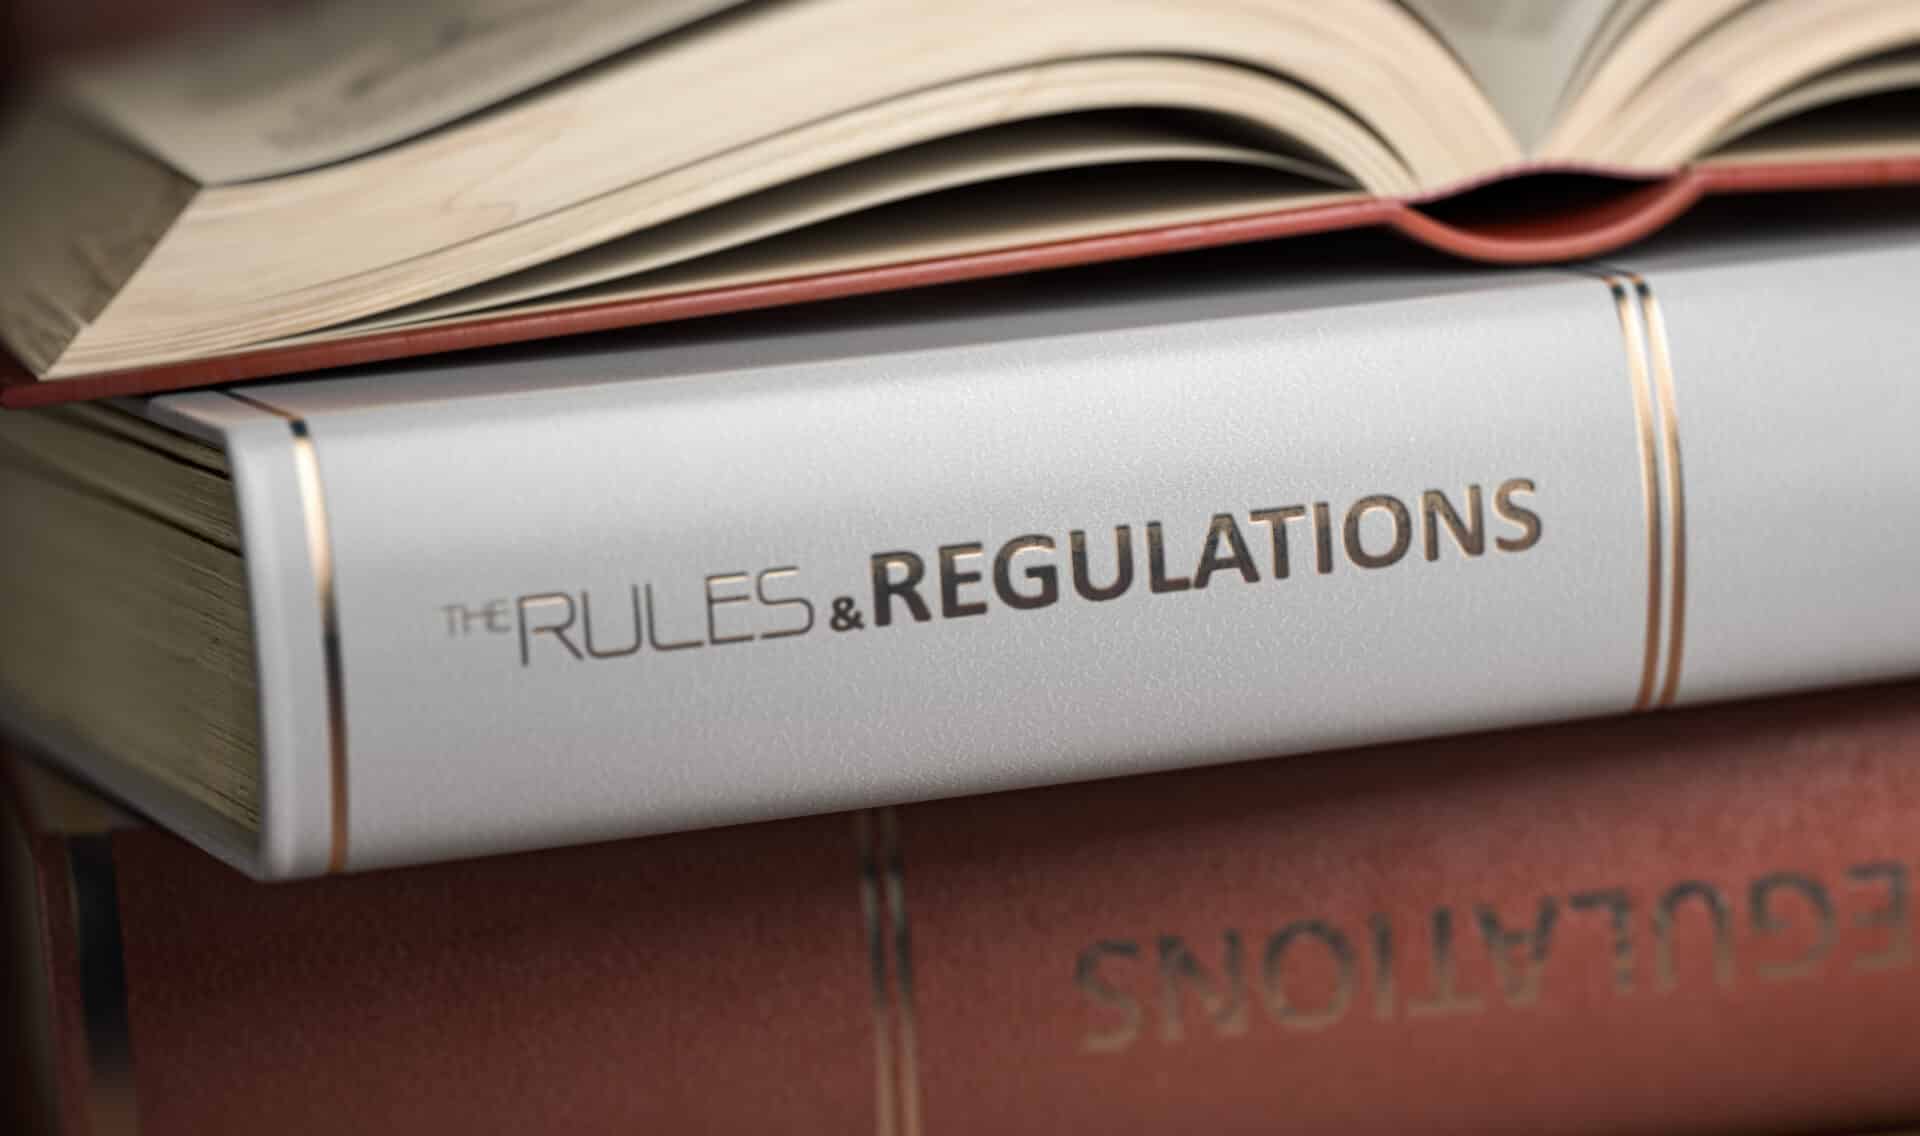 Rules And Regulations Book. Law, Rules And Regulations Concept.